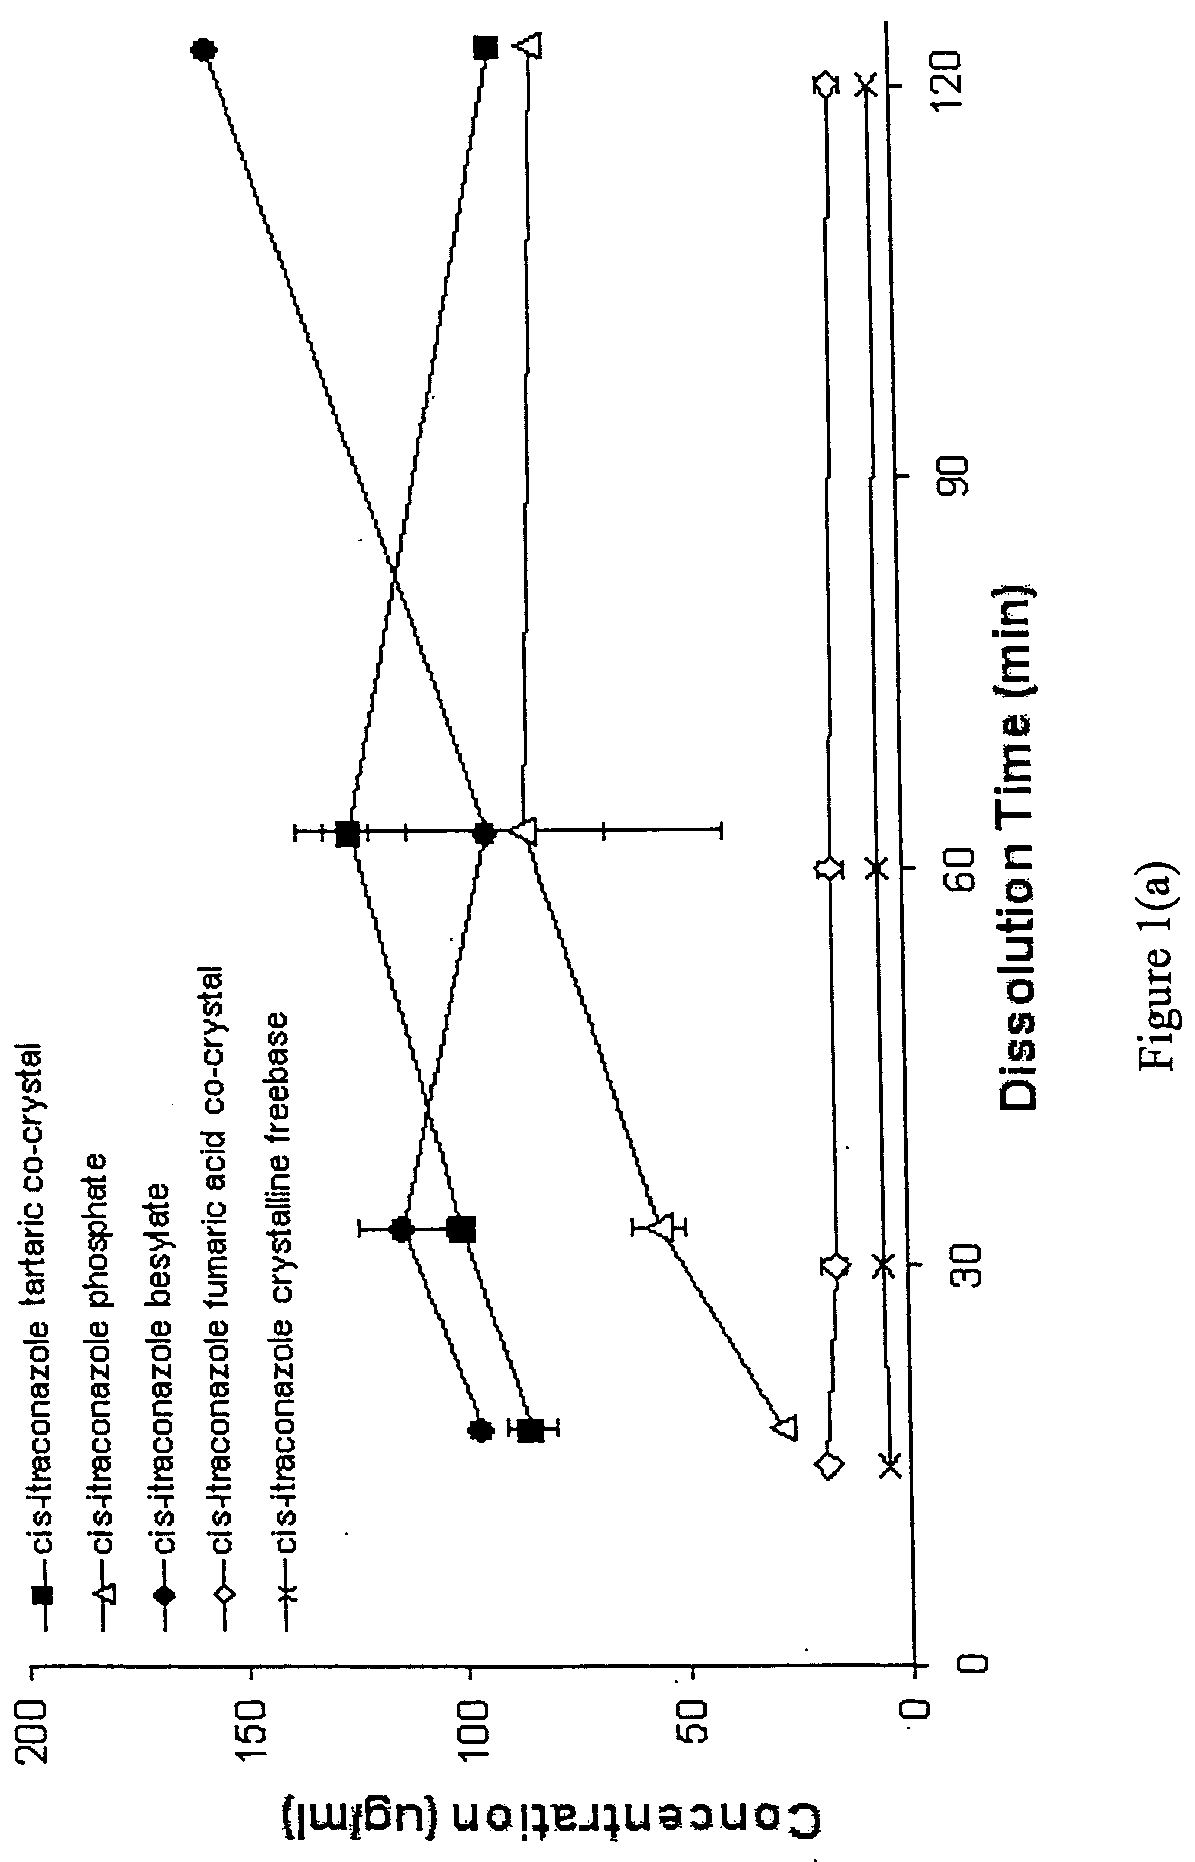 Novel crystalline forms of conazoles and methods of making and using the same